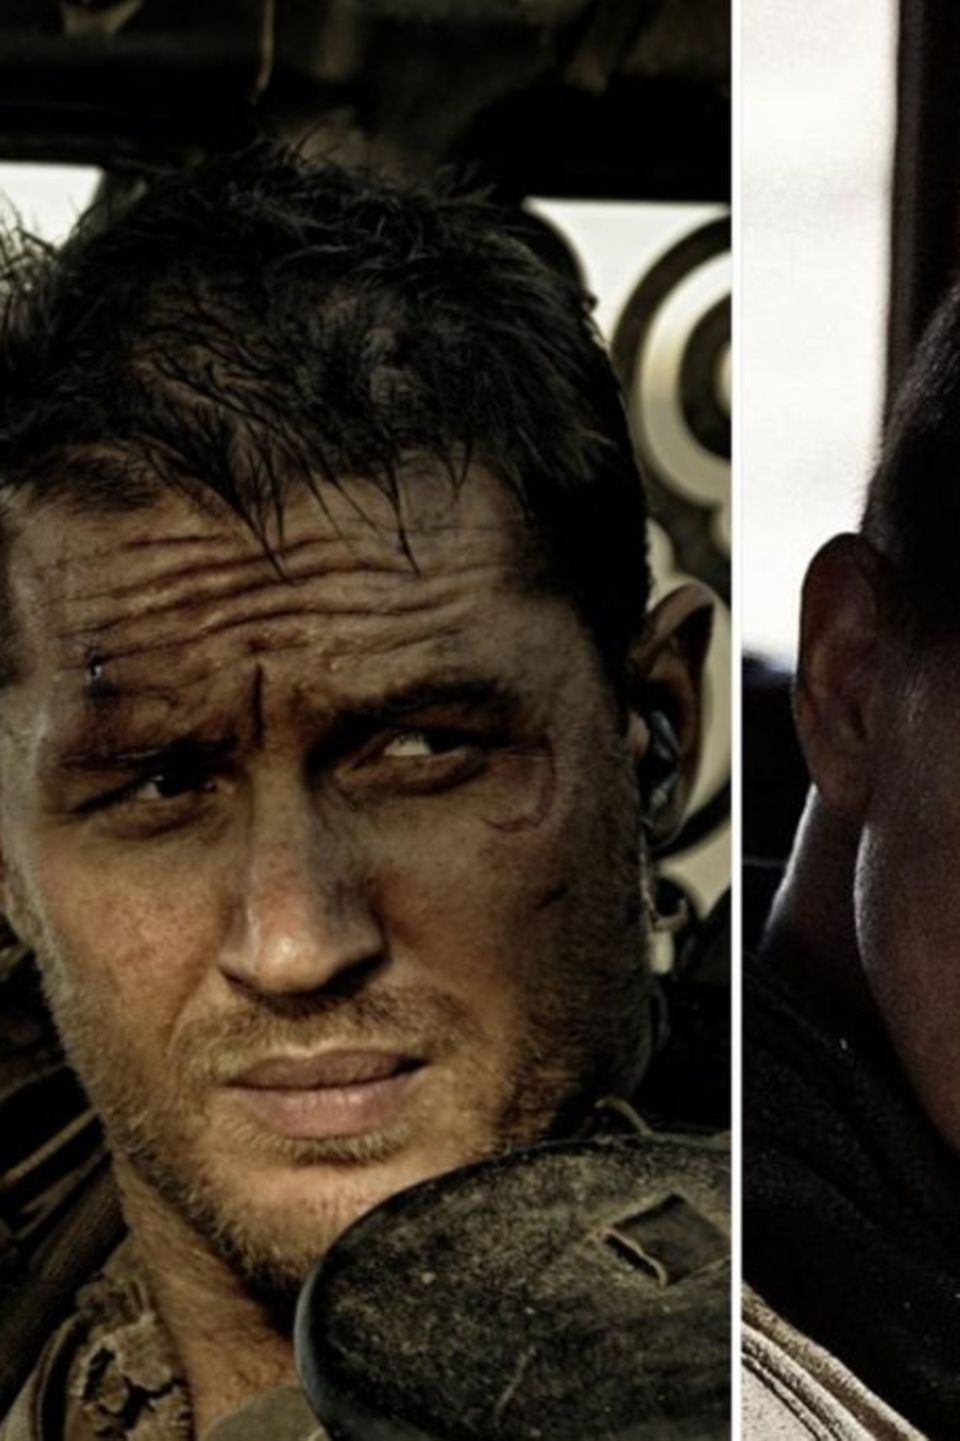 Keine Freunde: Tom Hardy und Charlize Theron in "Mad Max: Fury Road".